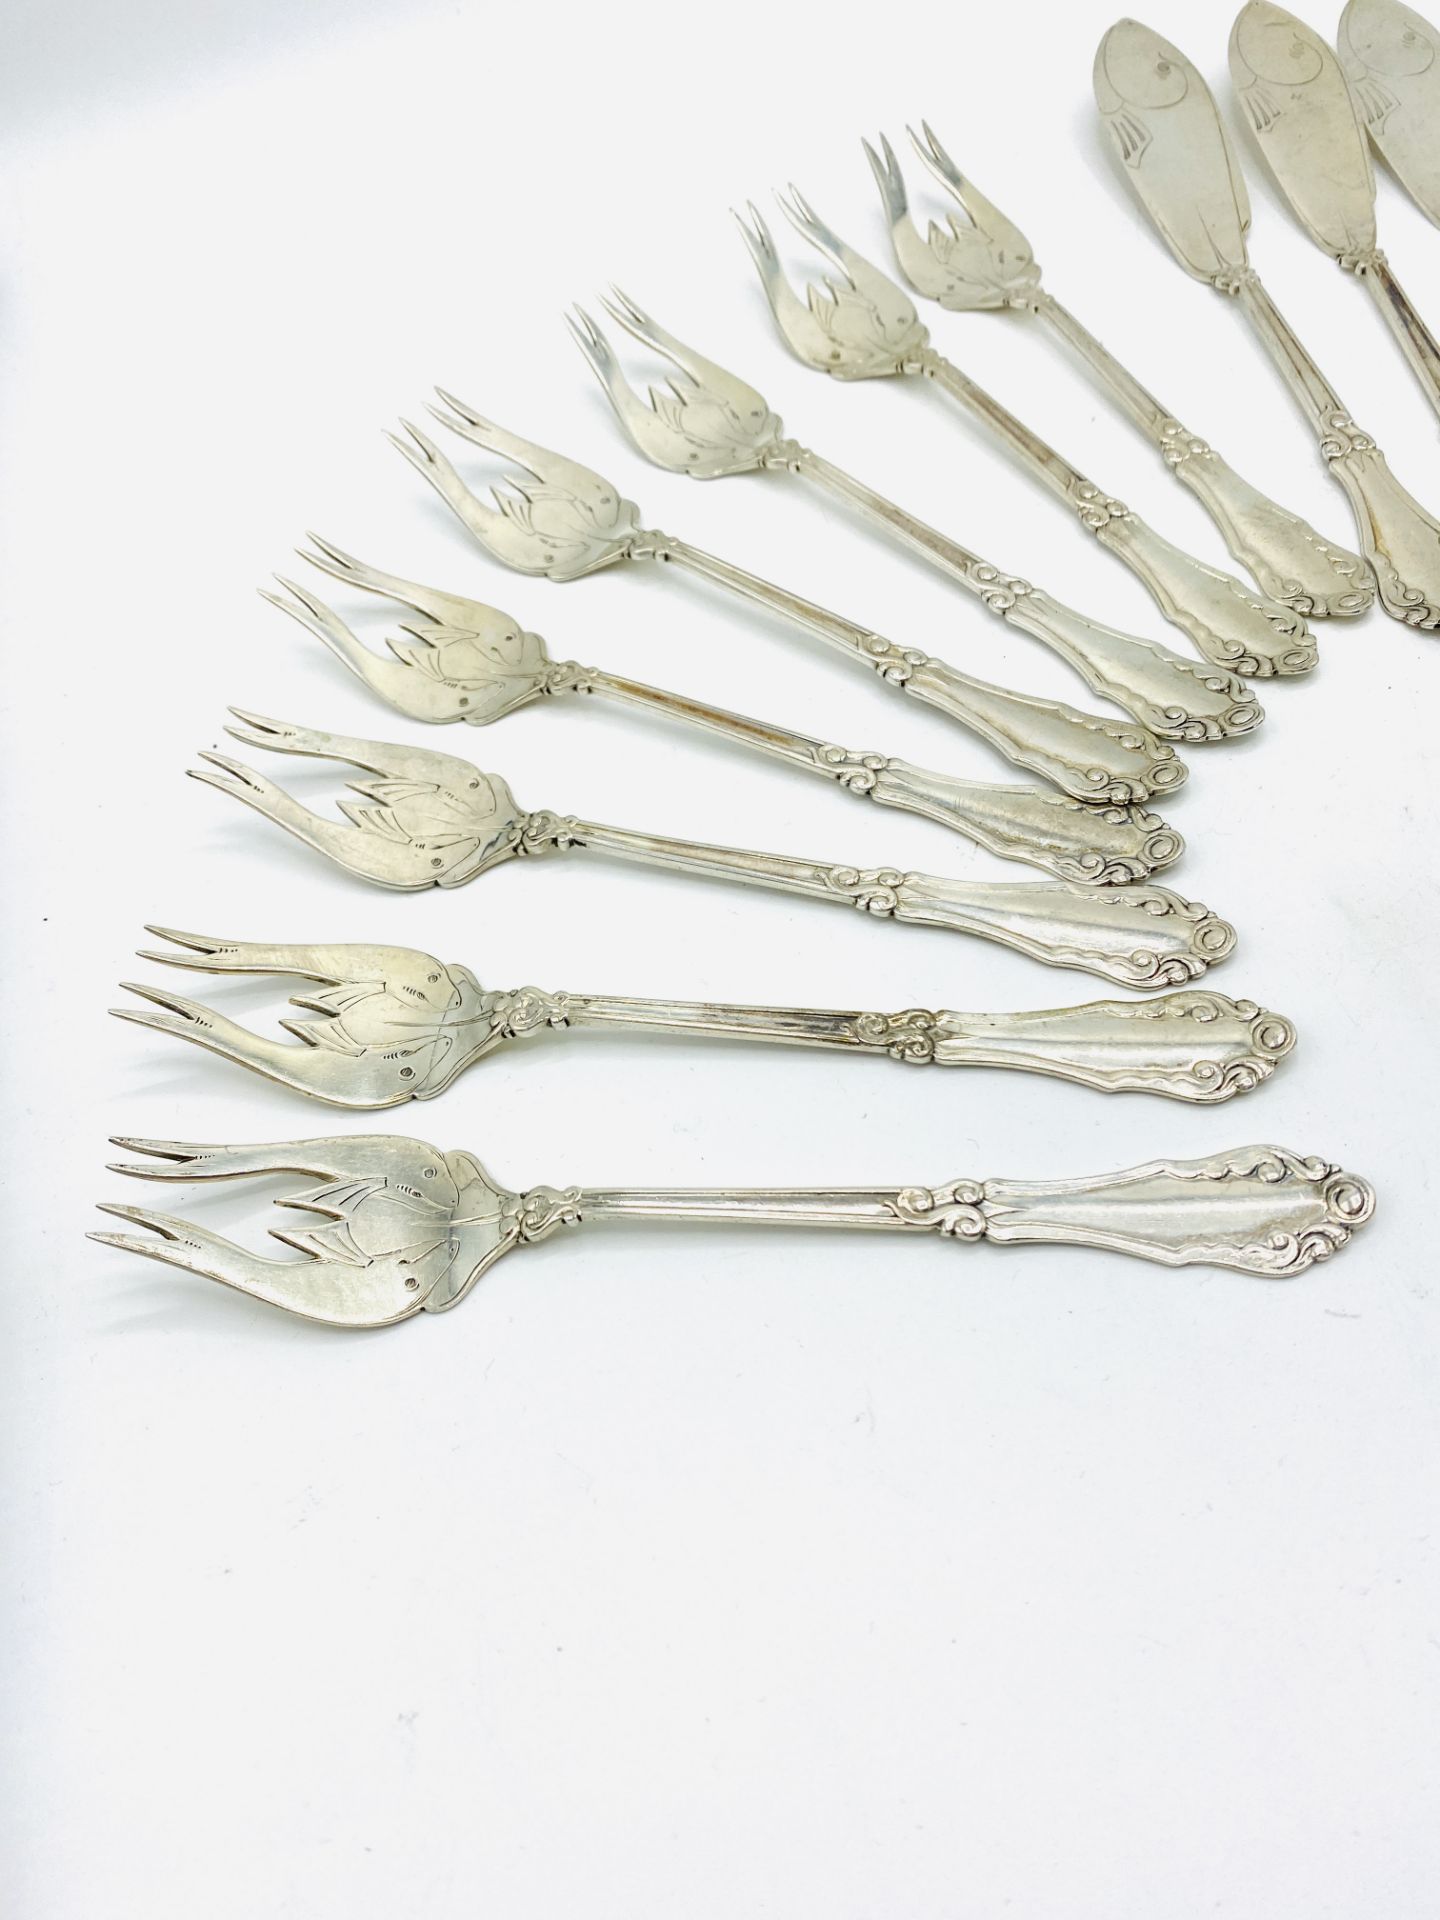 8 piece silver fish cutlery setting by Peter Hertz Of Denmark - Image 2 of 6